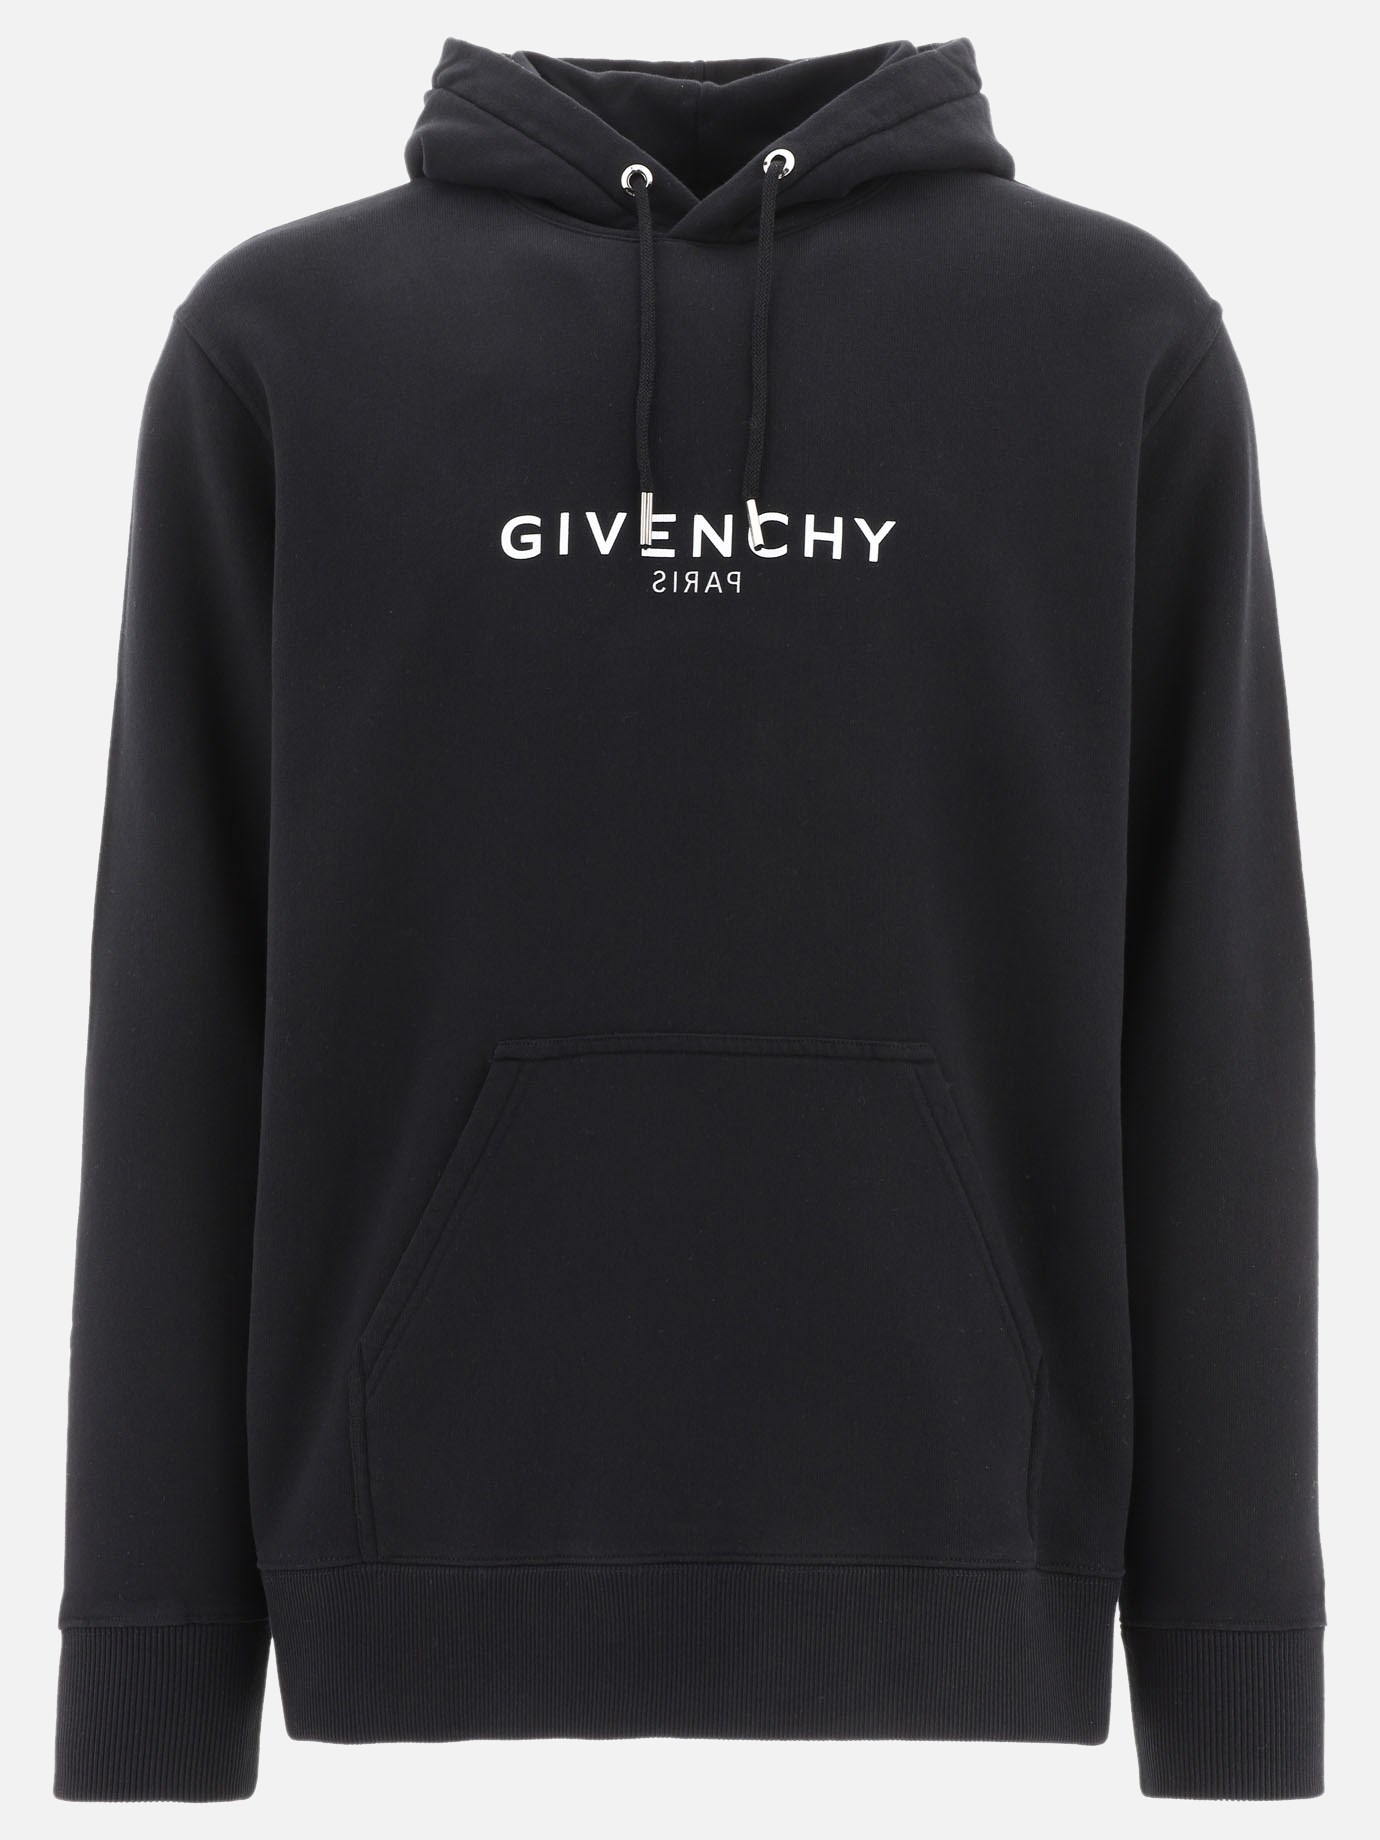  Reverse  hoodieby Givenchy - 1